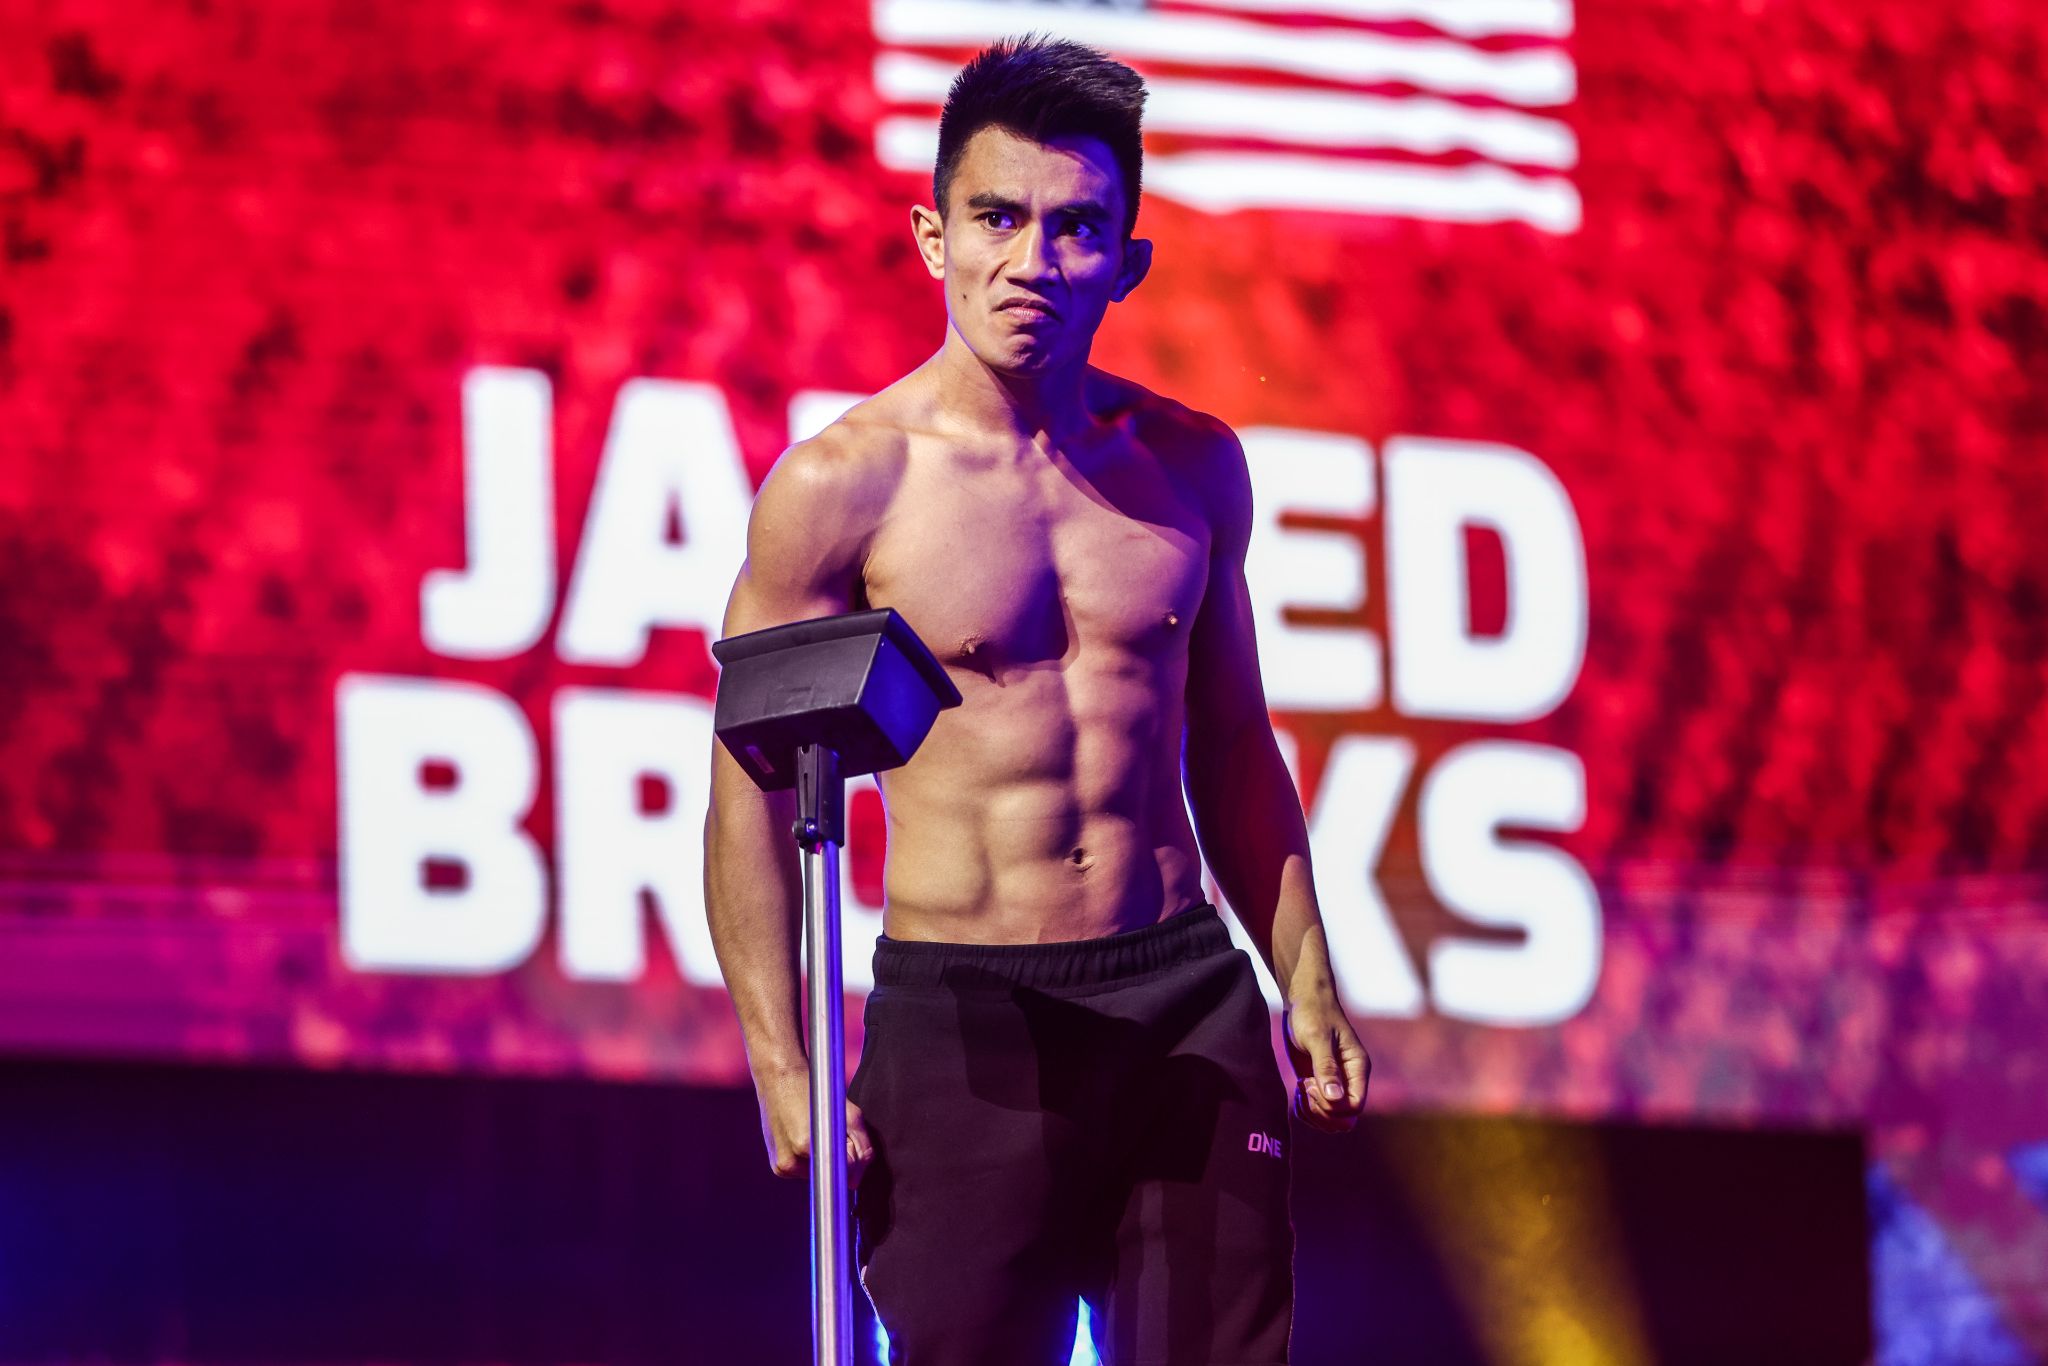 Joshua Pacio walks out injury-free from rematch with Jarred Brooks